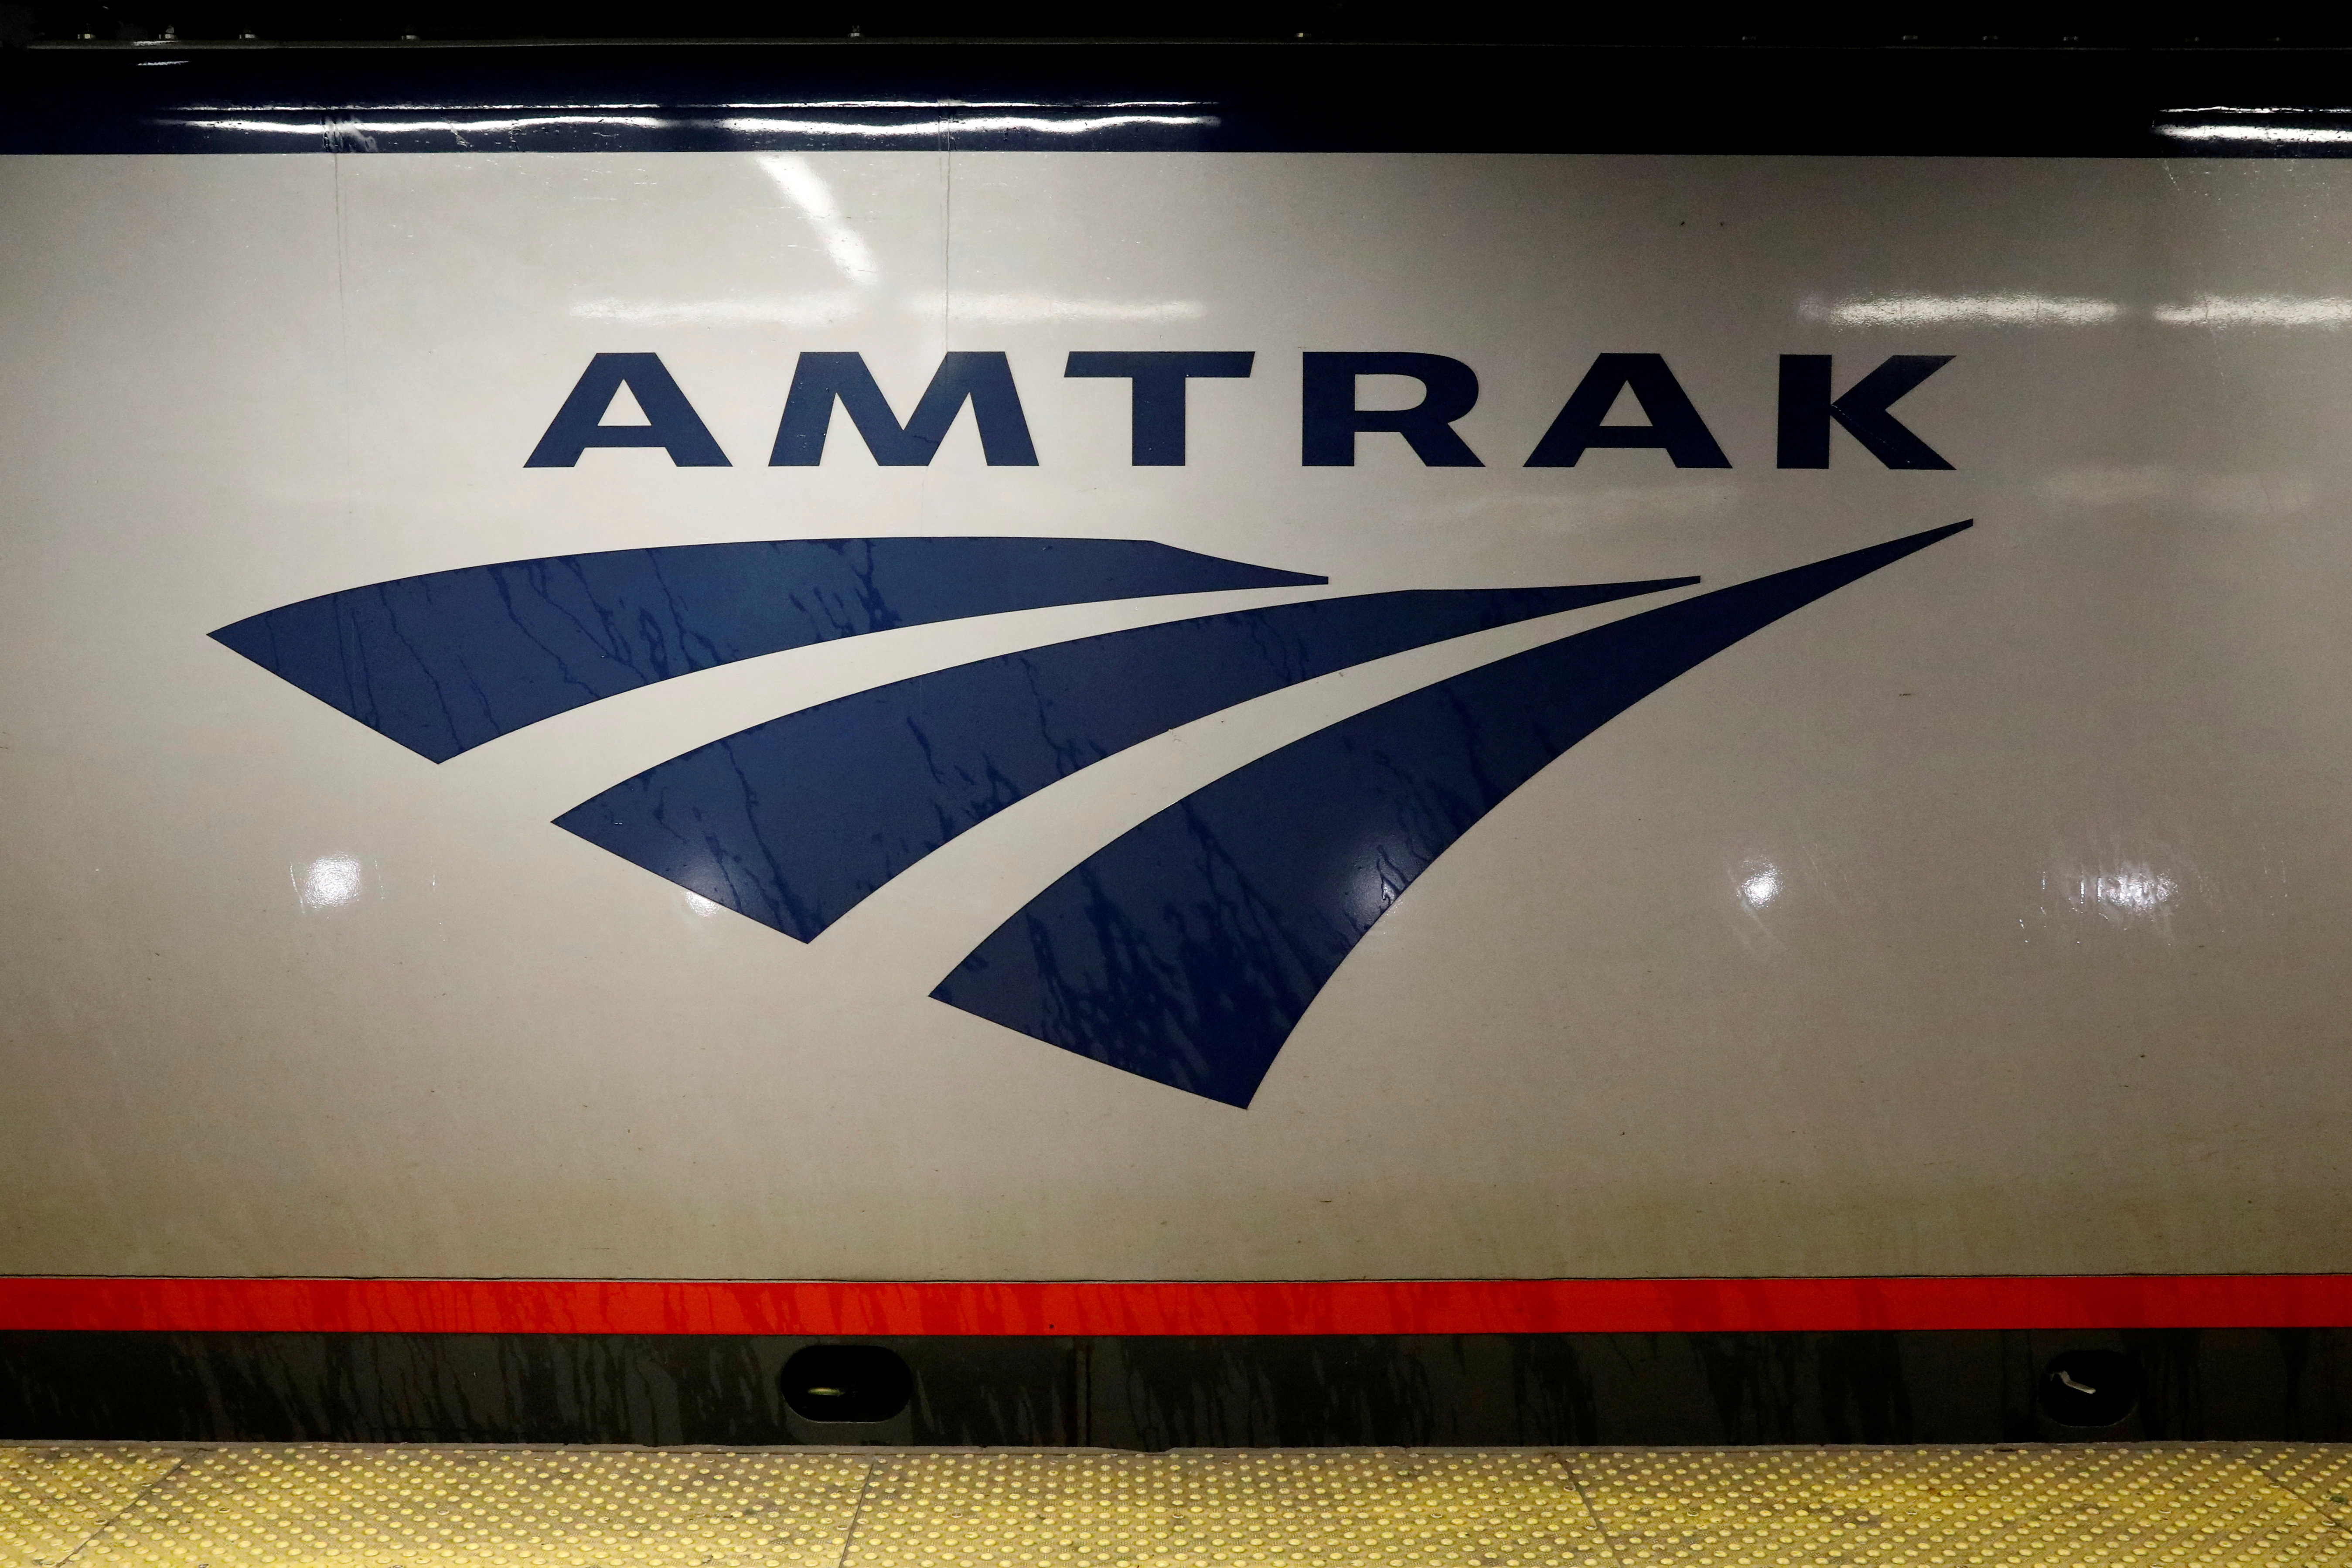 An Amtrak train is parked at the platform inside New York's Penn Station